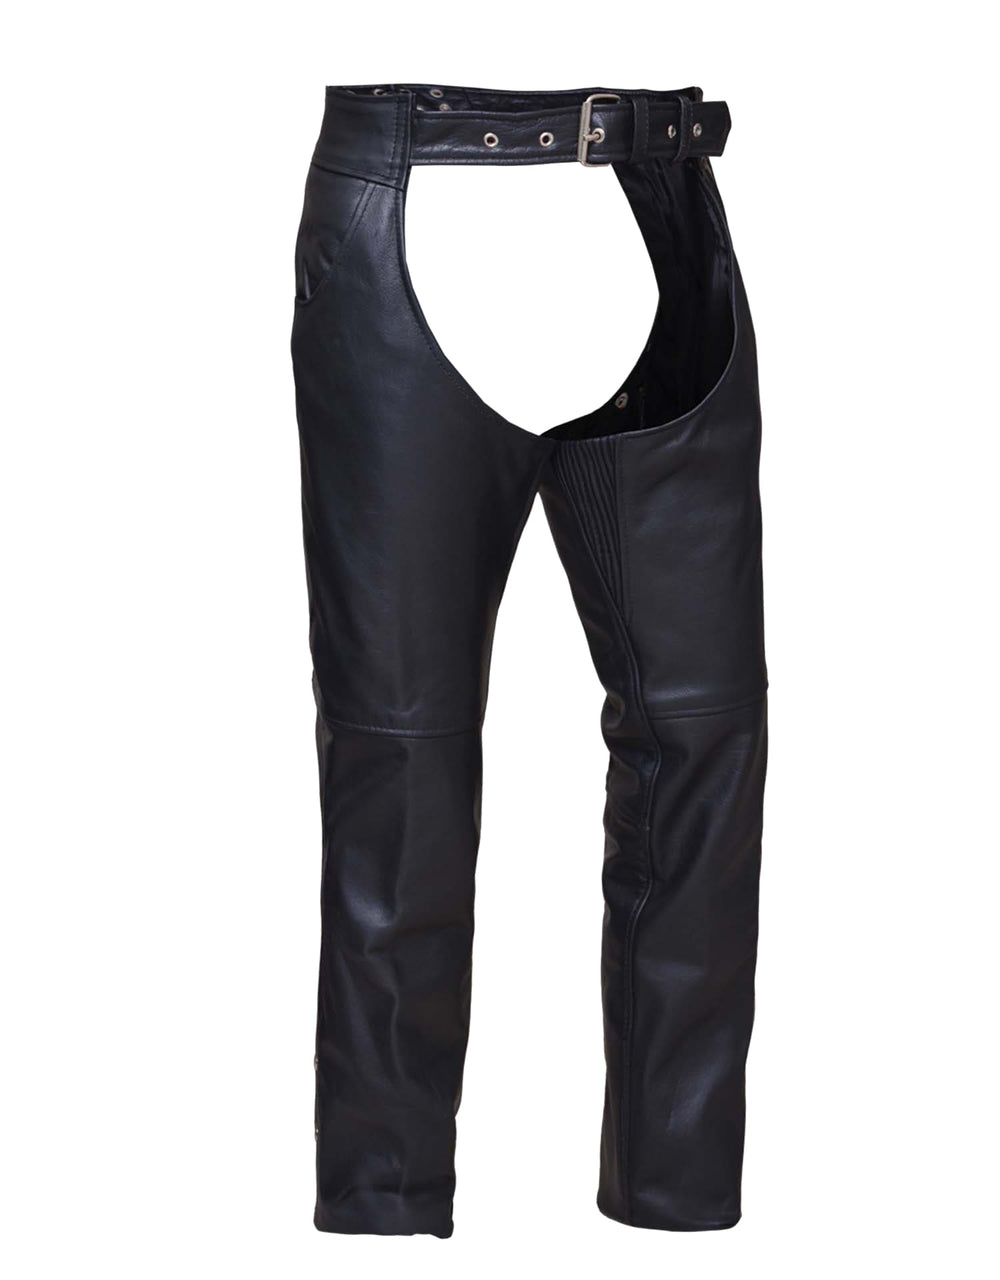 Unisex Jean Pocket Motorcycle Chaps with Spandex - 7107.00 - HighwayLeather